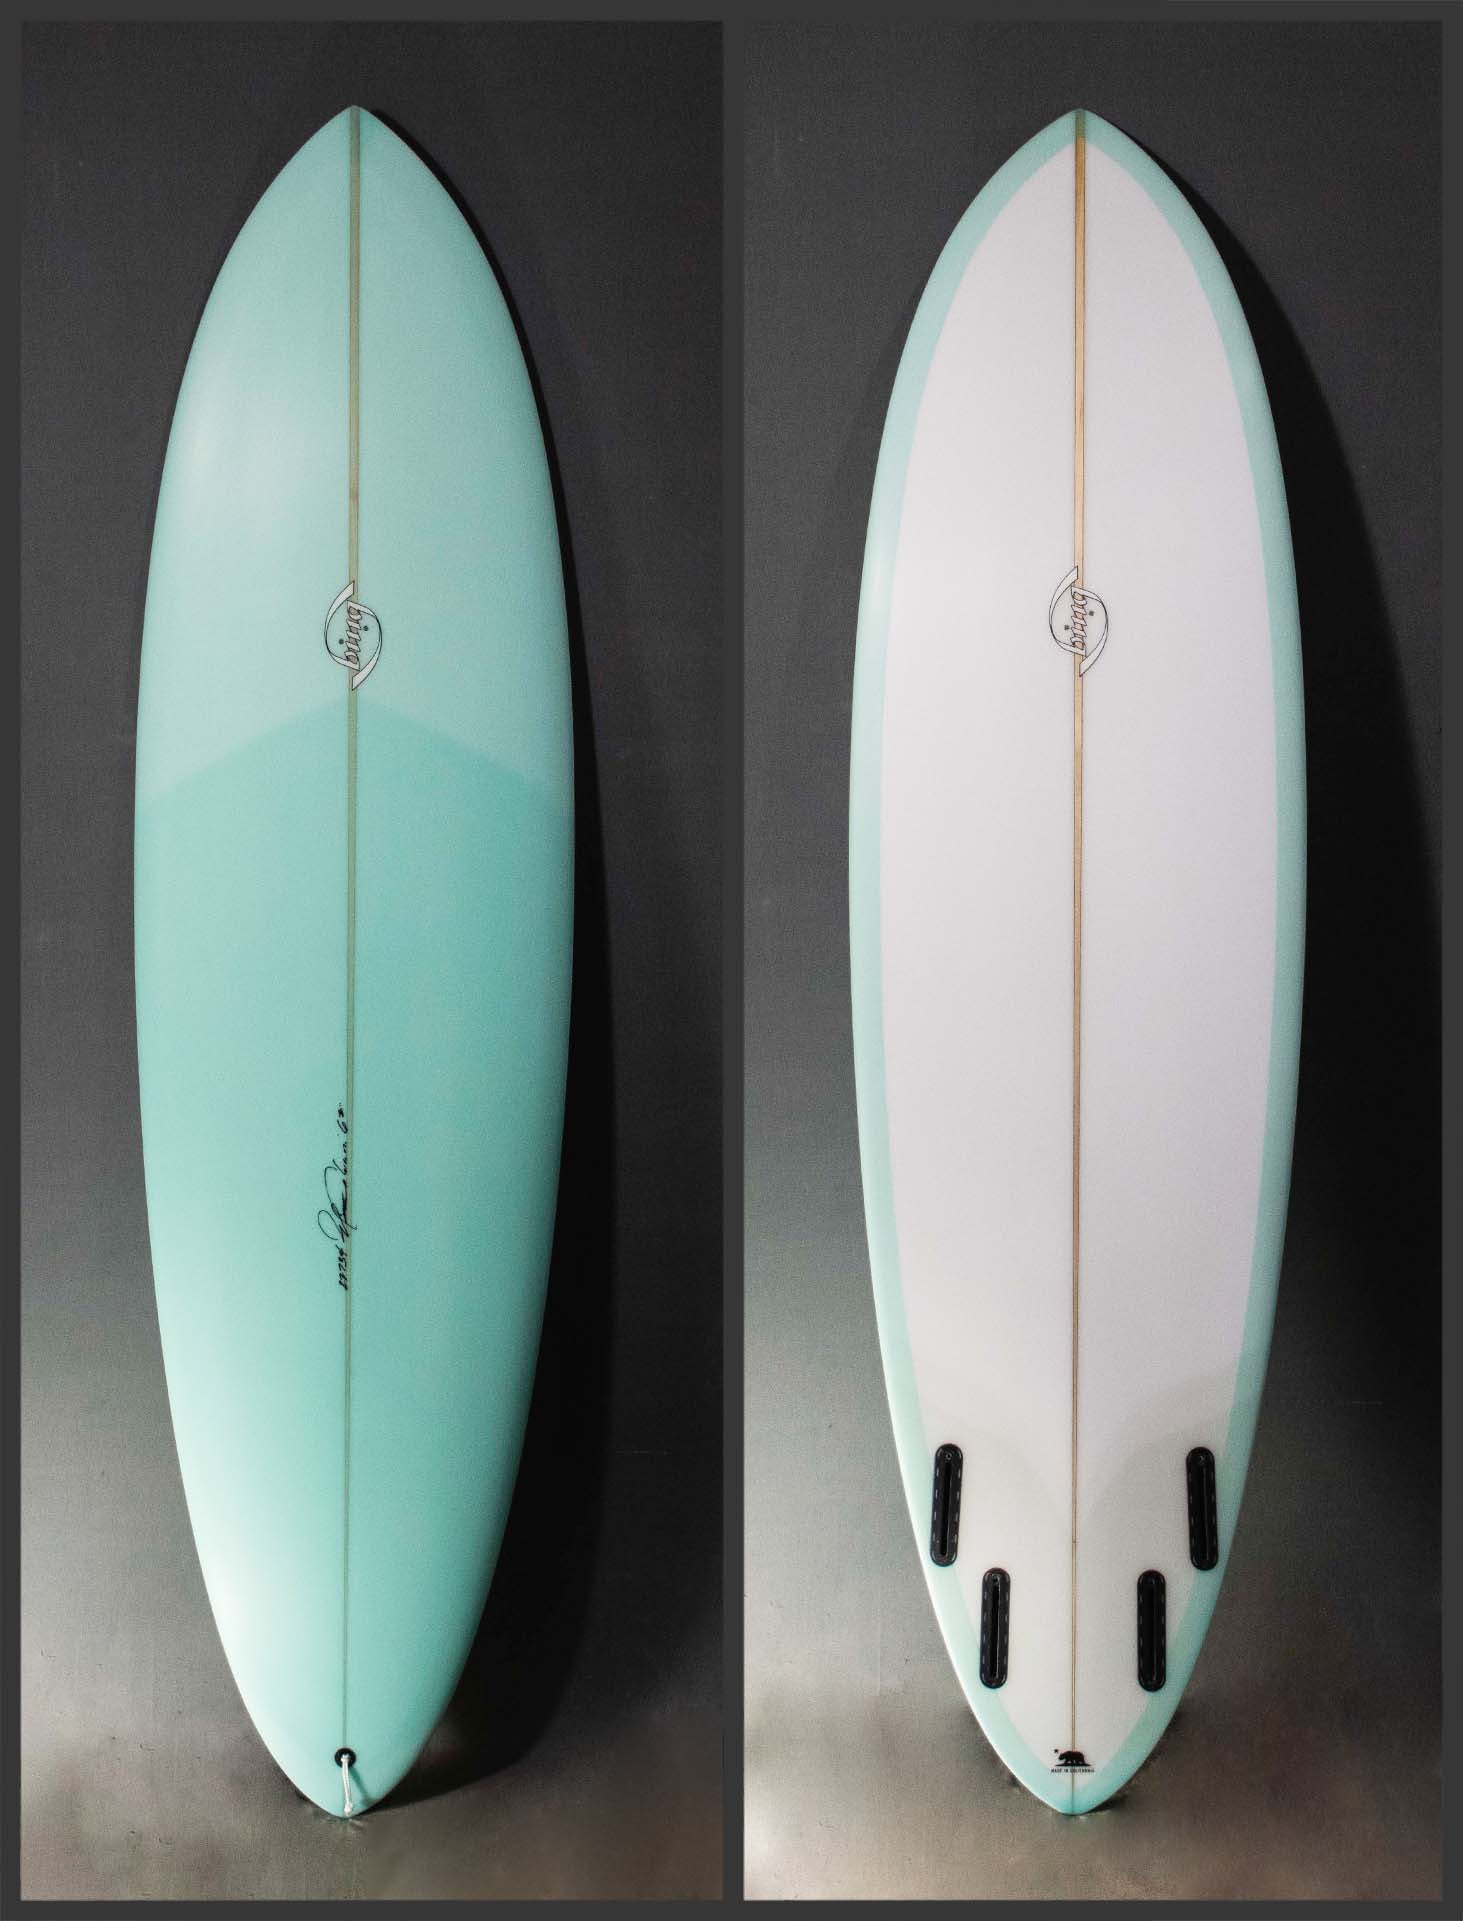 These entrepreneurs make surfboards from old fishing nets